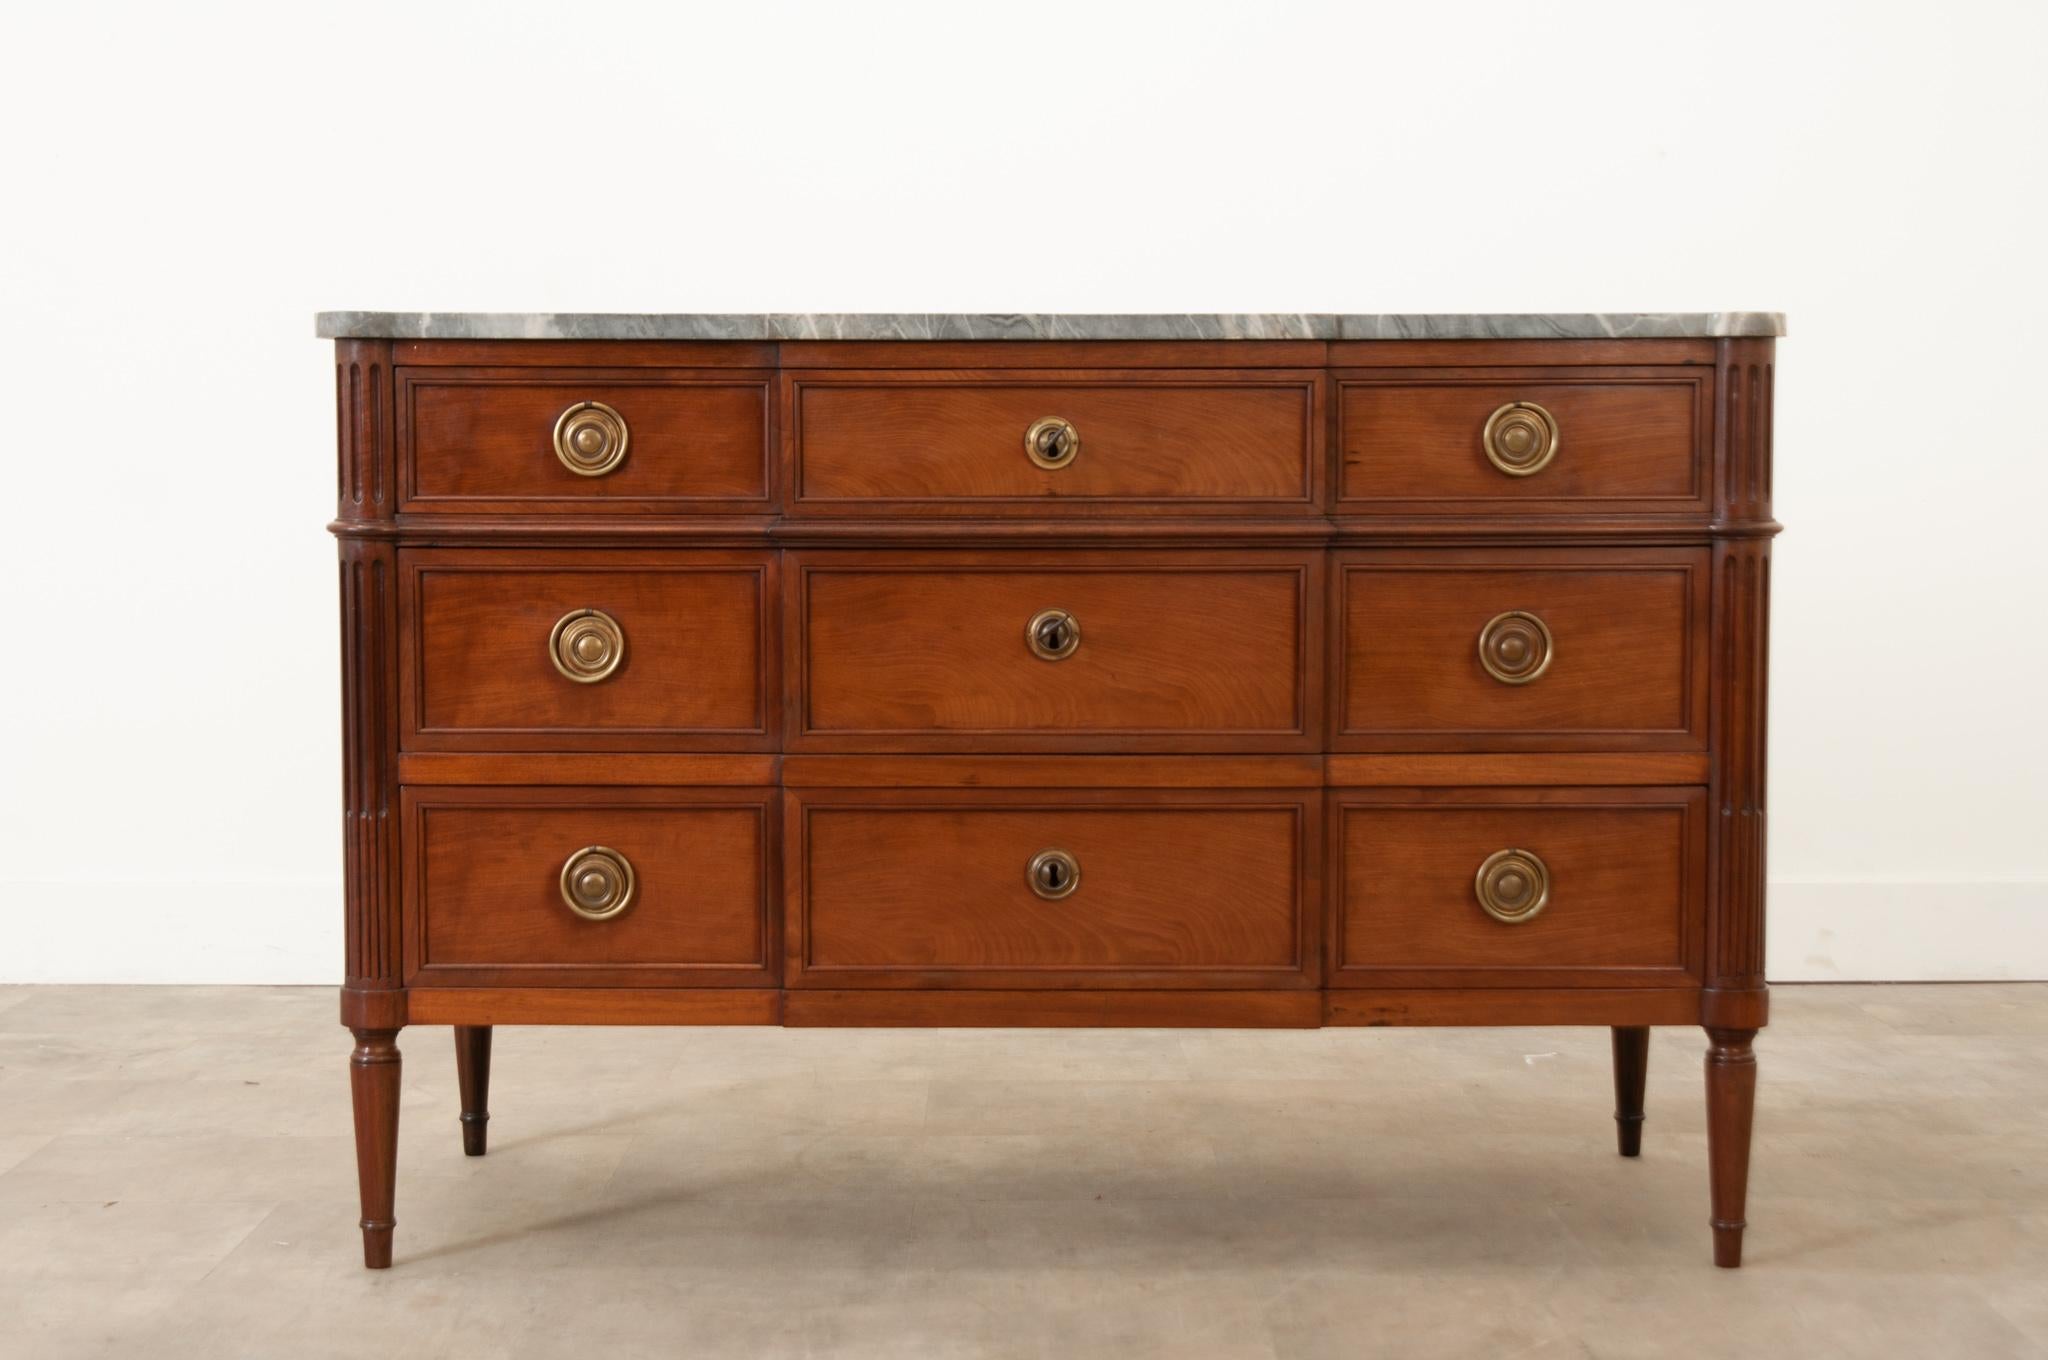 This fantastic Parisian walnut commode was crafted in 19th century France circa 1850.  The original break front marble top with turret edges is shaped according to the body of the piece. Three top drawers open separately, while the two bottom